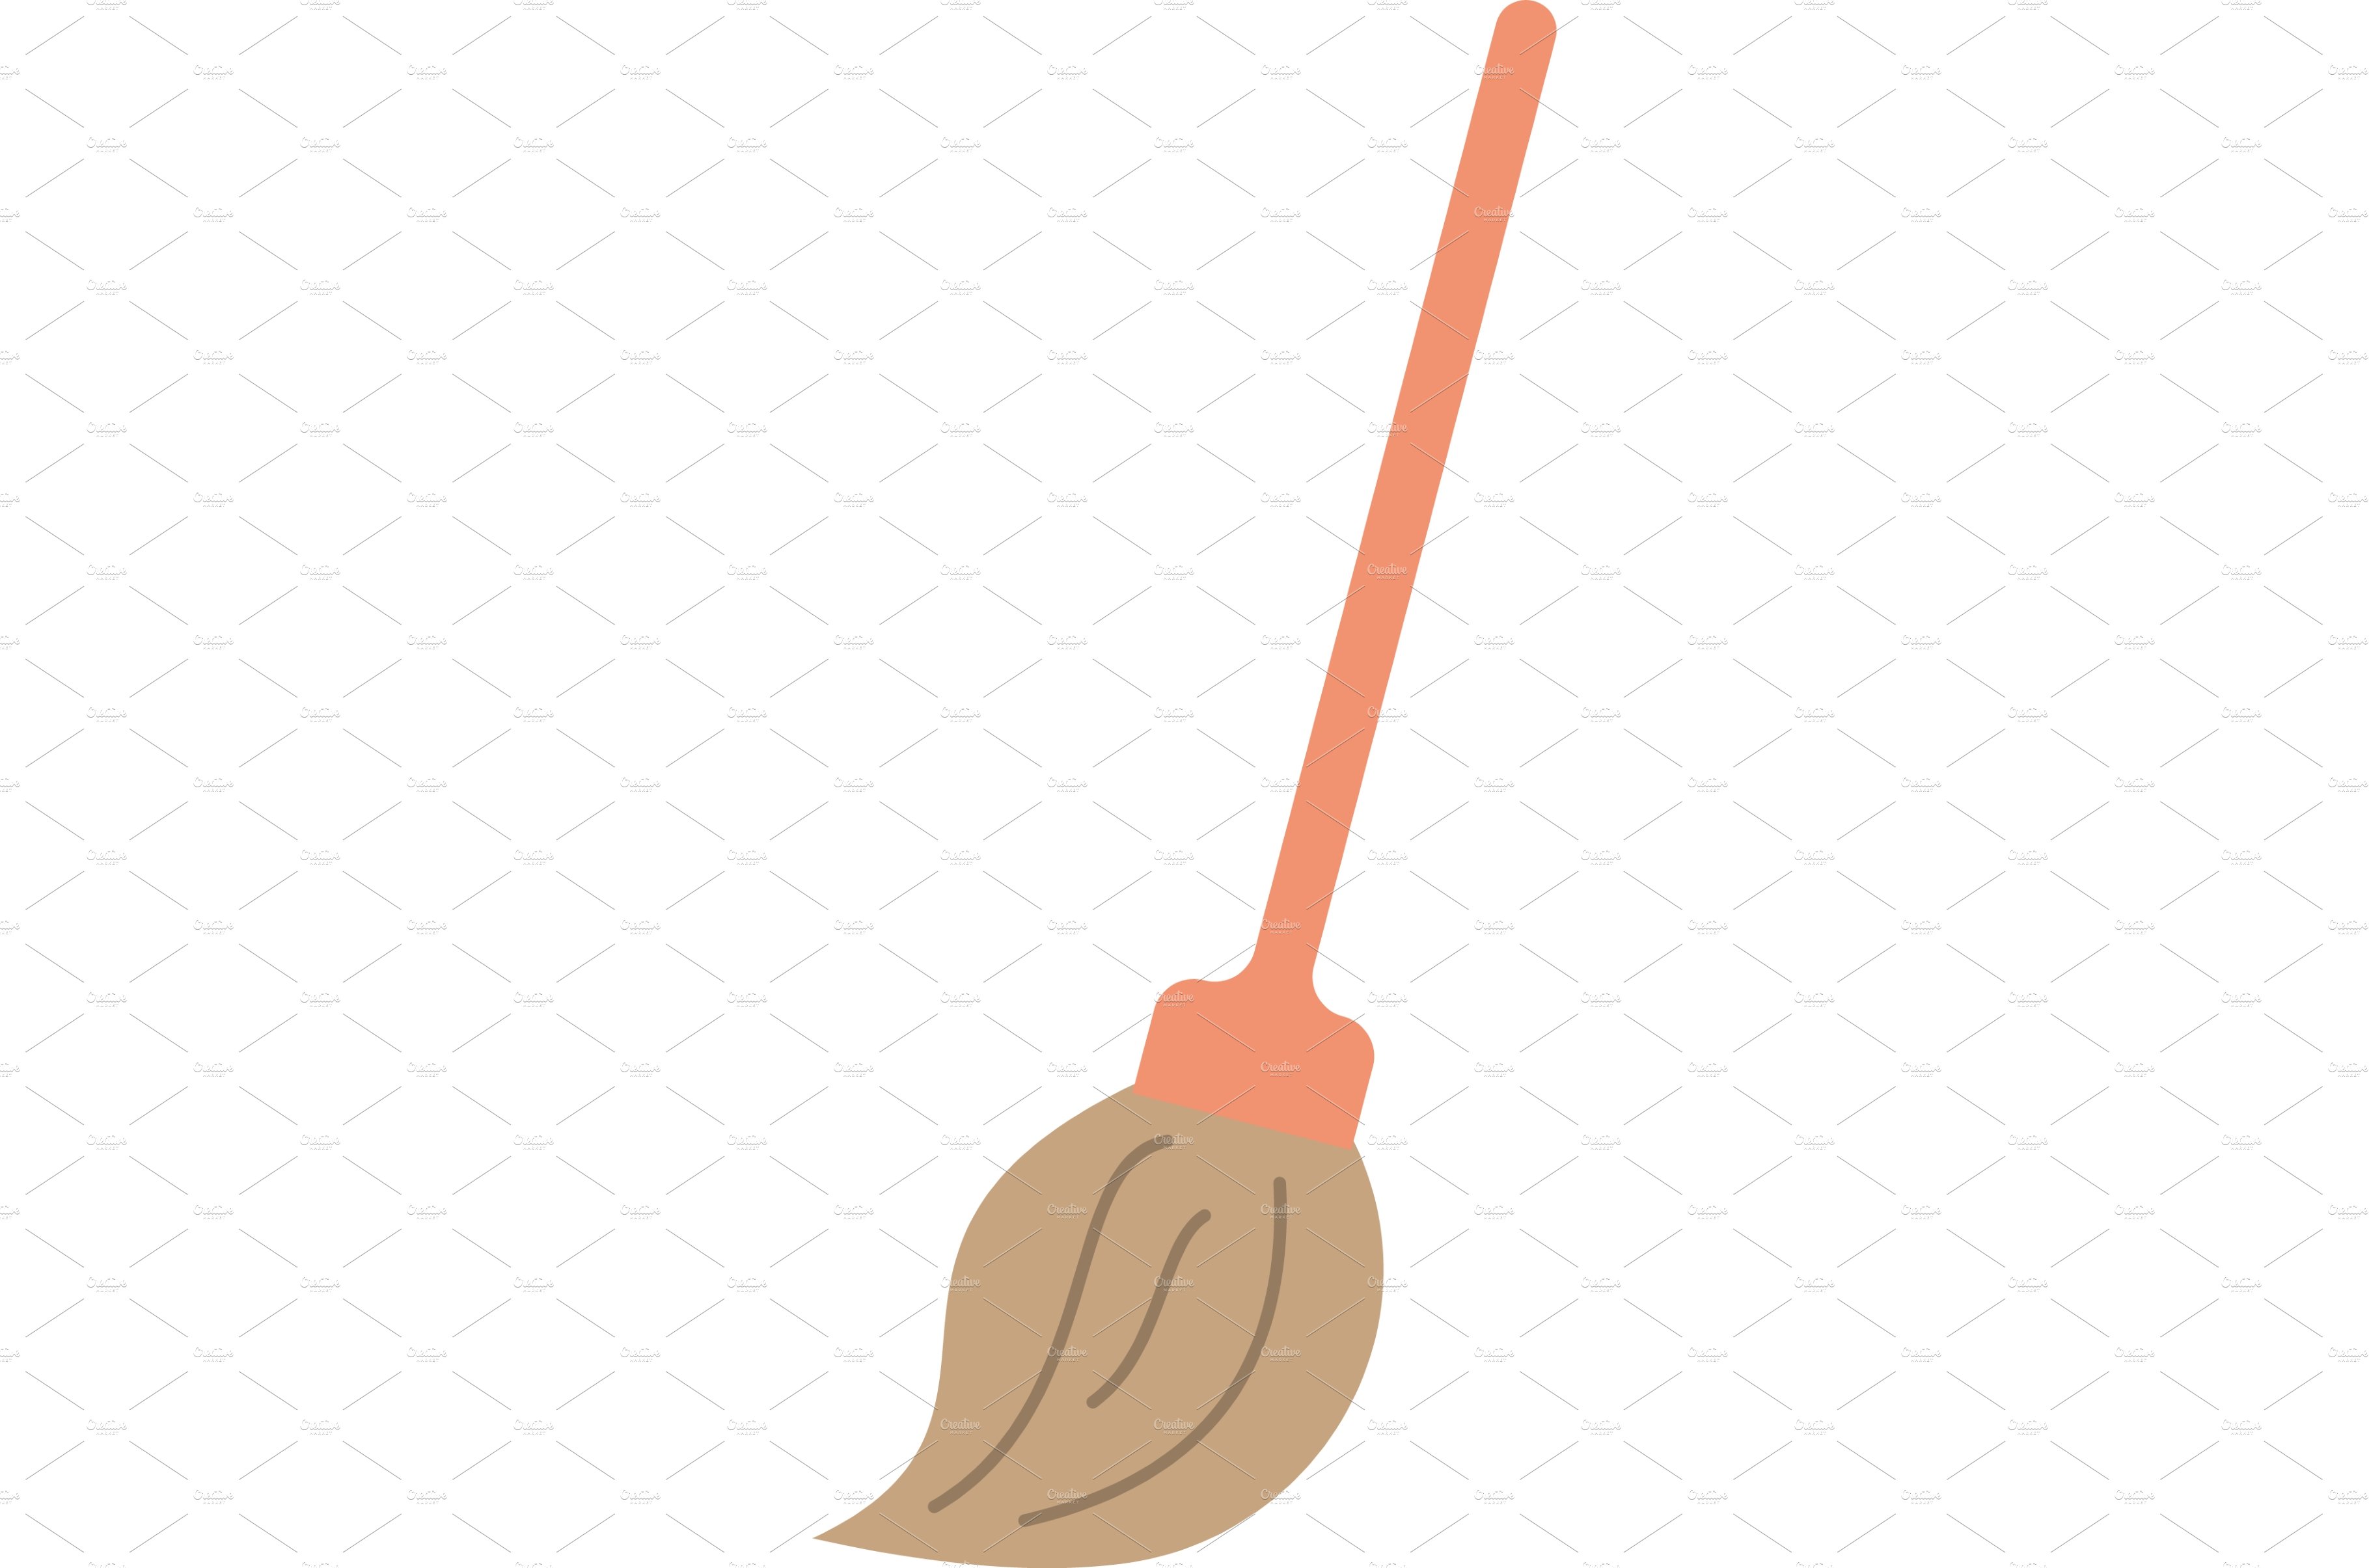 Broom stick icon vector isolated on cover image.